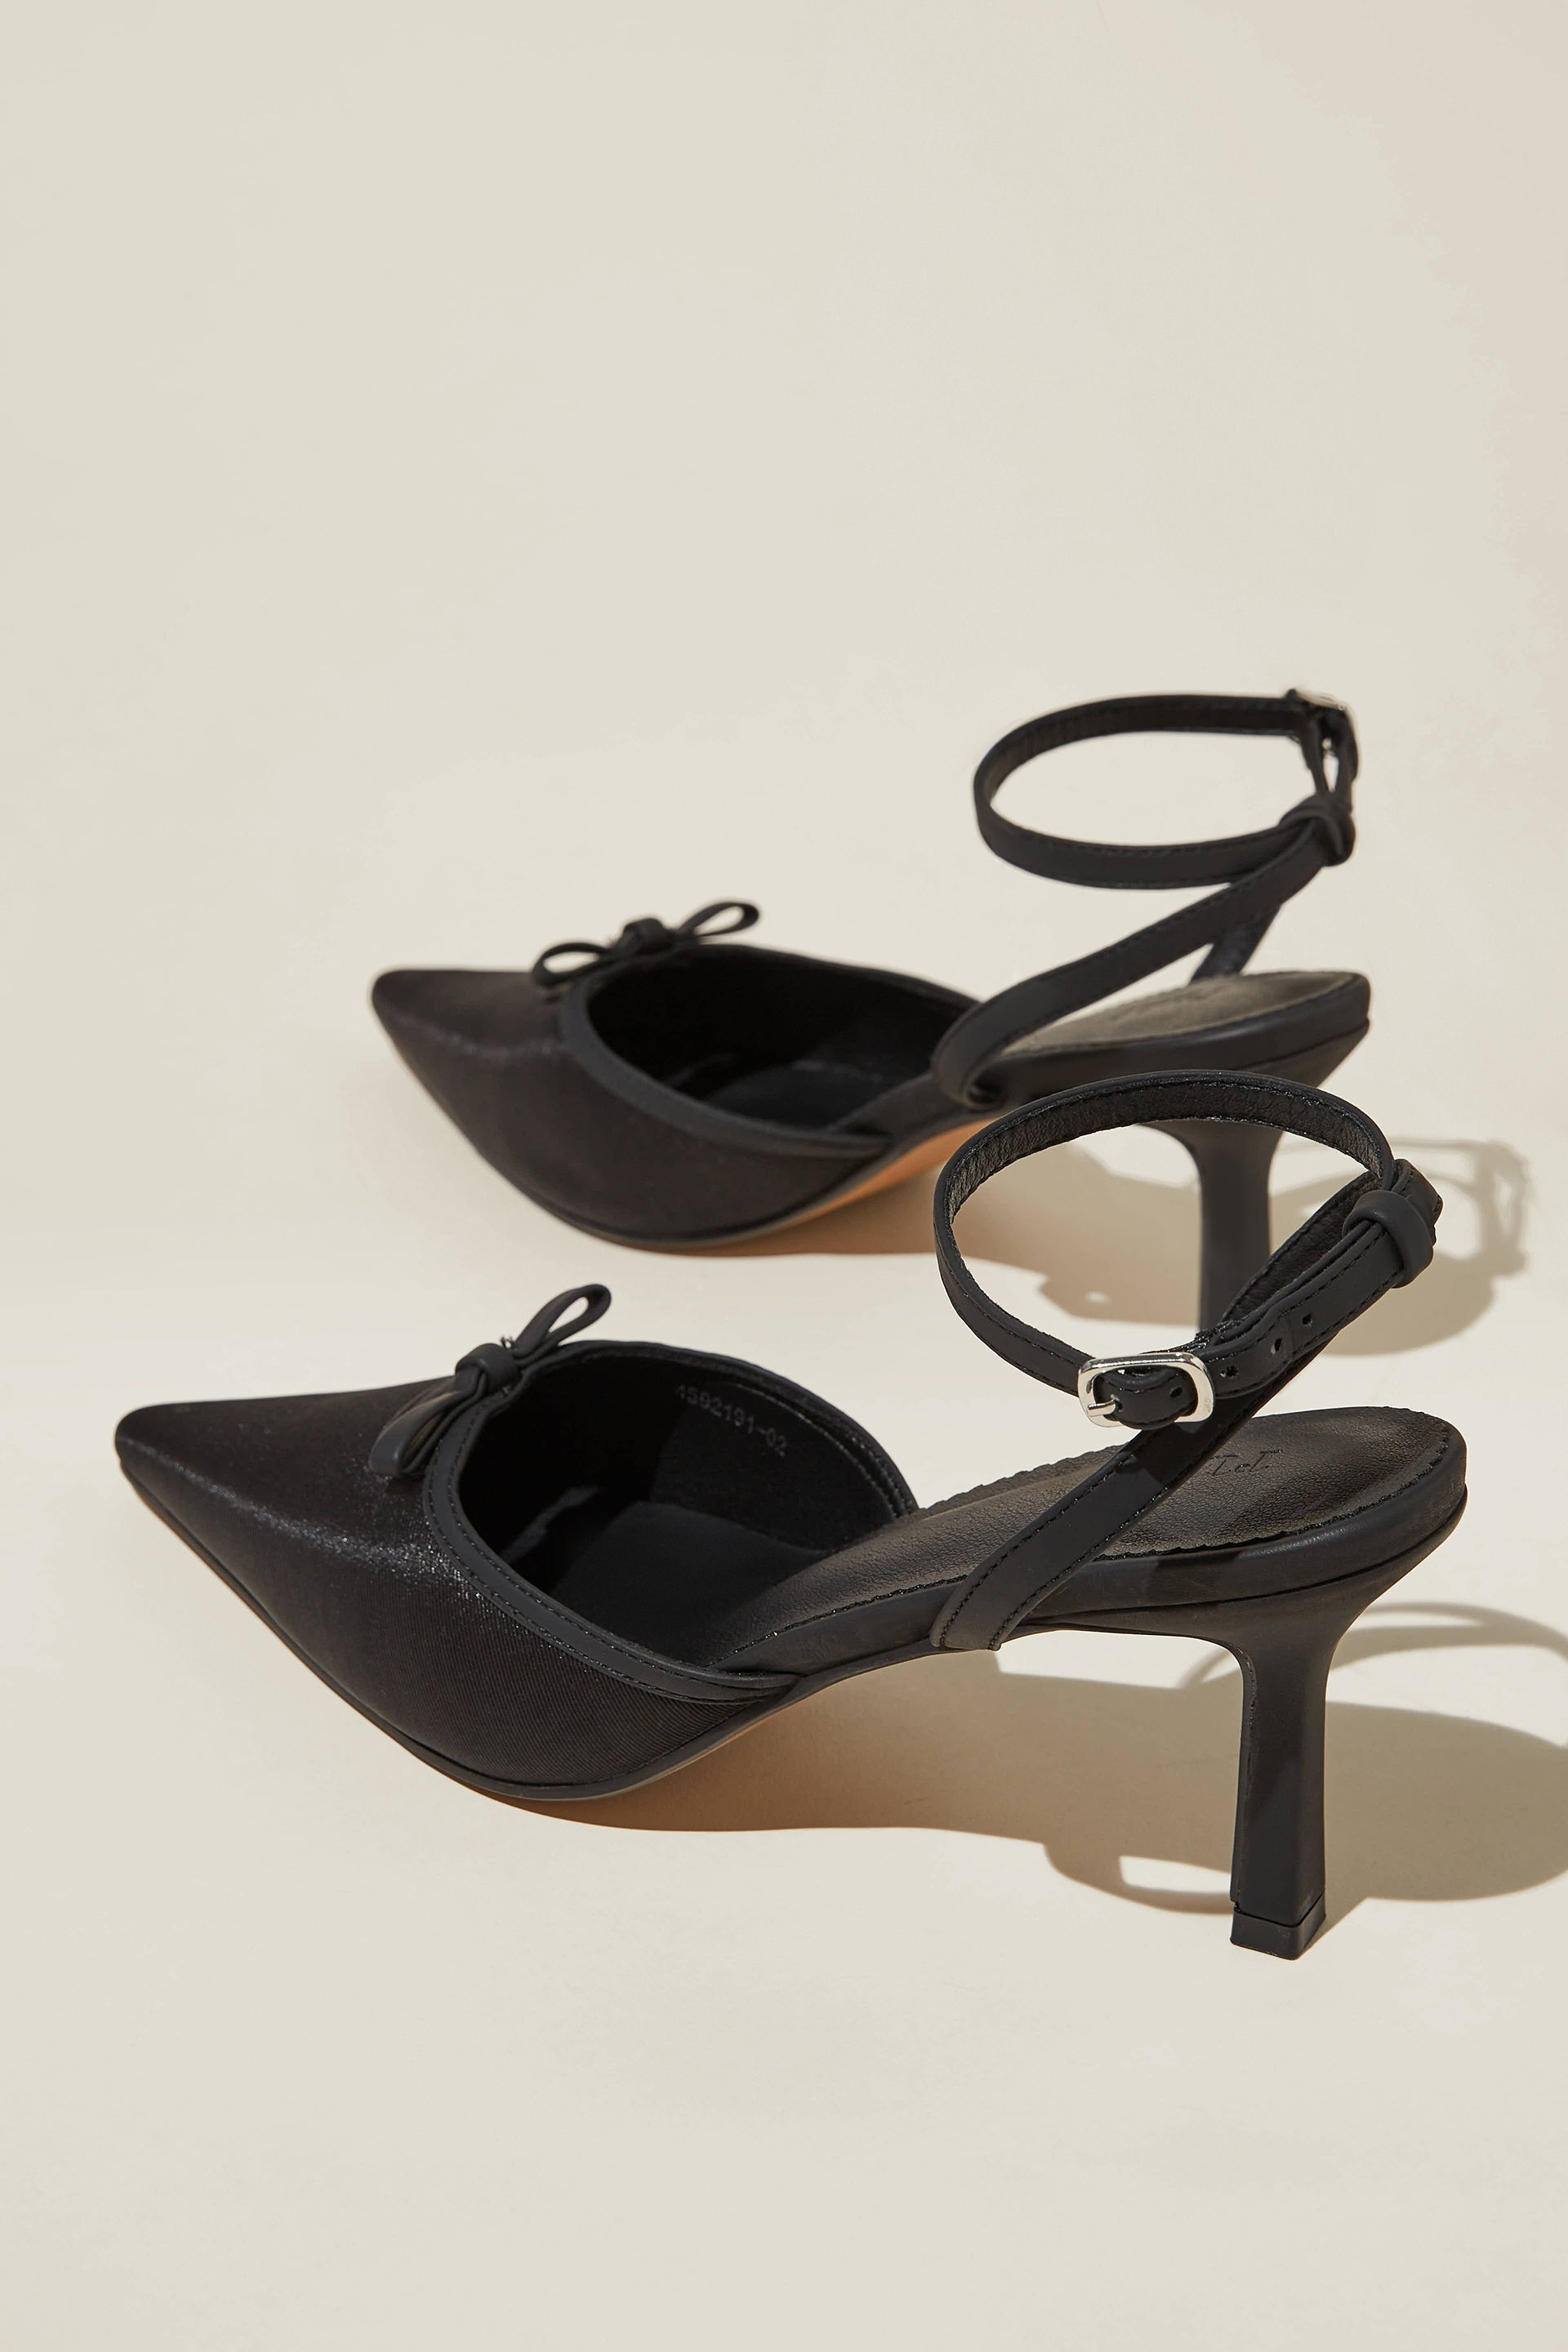 Scarlet Kitten Leather Slingback Pumps and Slingback in Black for Women |  Casadei®